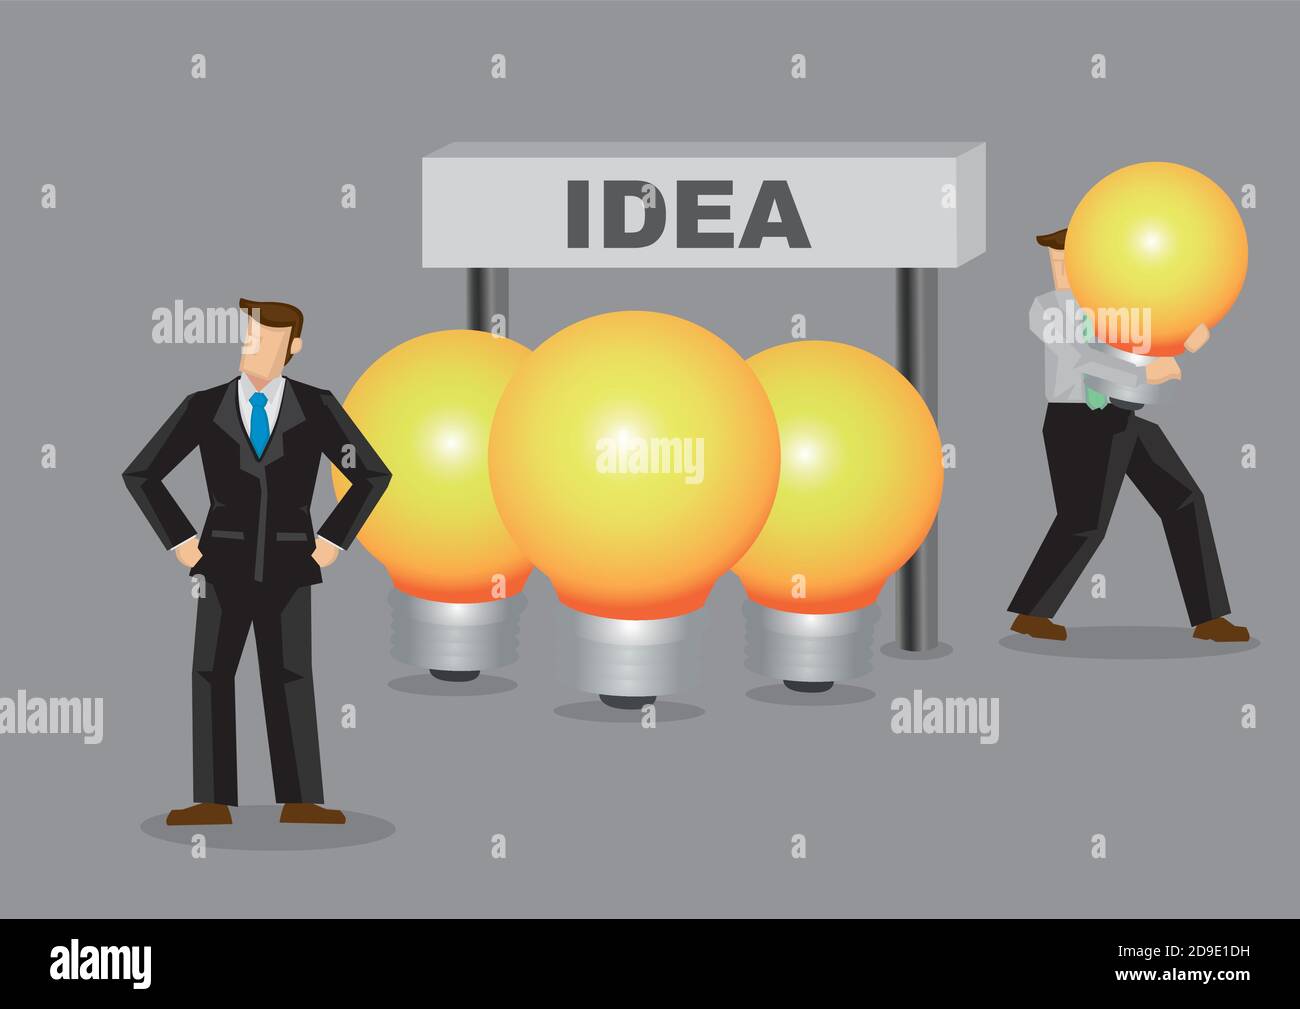 Business professional of unaware of his lightbulb being stolen behind his back. Creative cartoon vector illustration for metaphor for intellectual pro Stock Vector